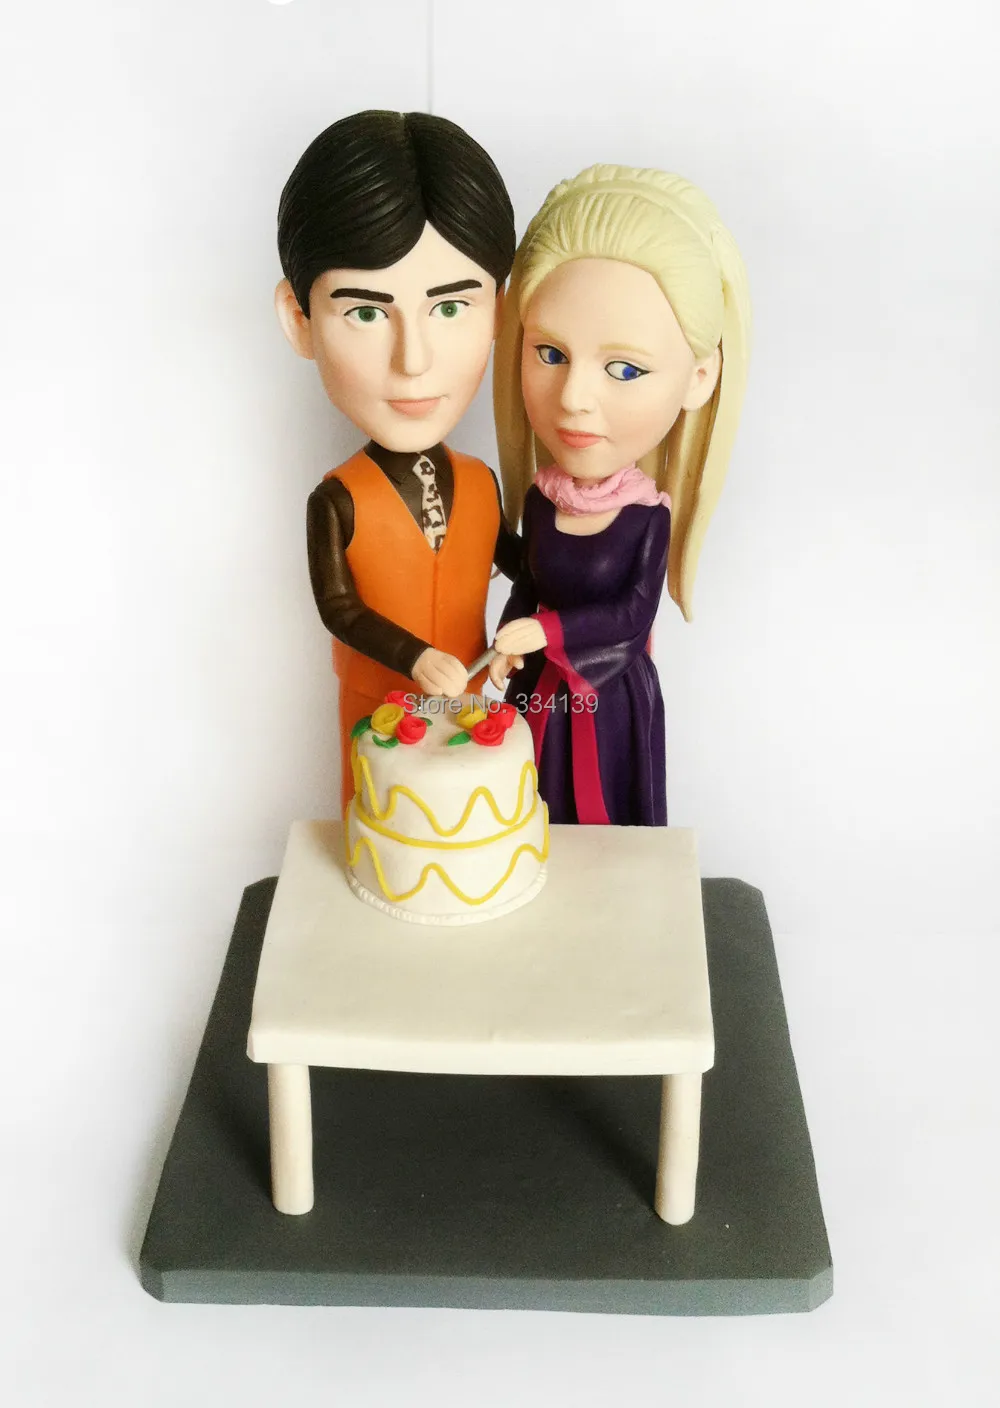 50th wedding anniversary funny wedding cake topper cake decorating clay  wedding cake topper personalized doll fimo toppers|toppers cars|topper  hatdolls chinese - AliExpress